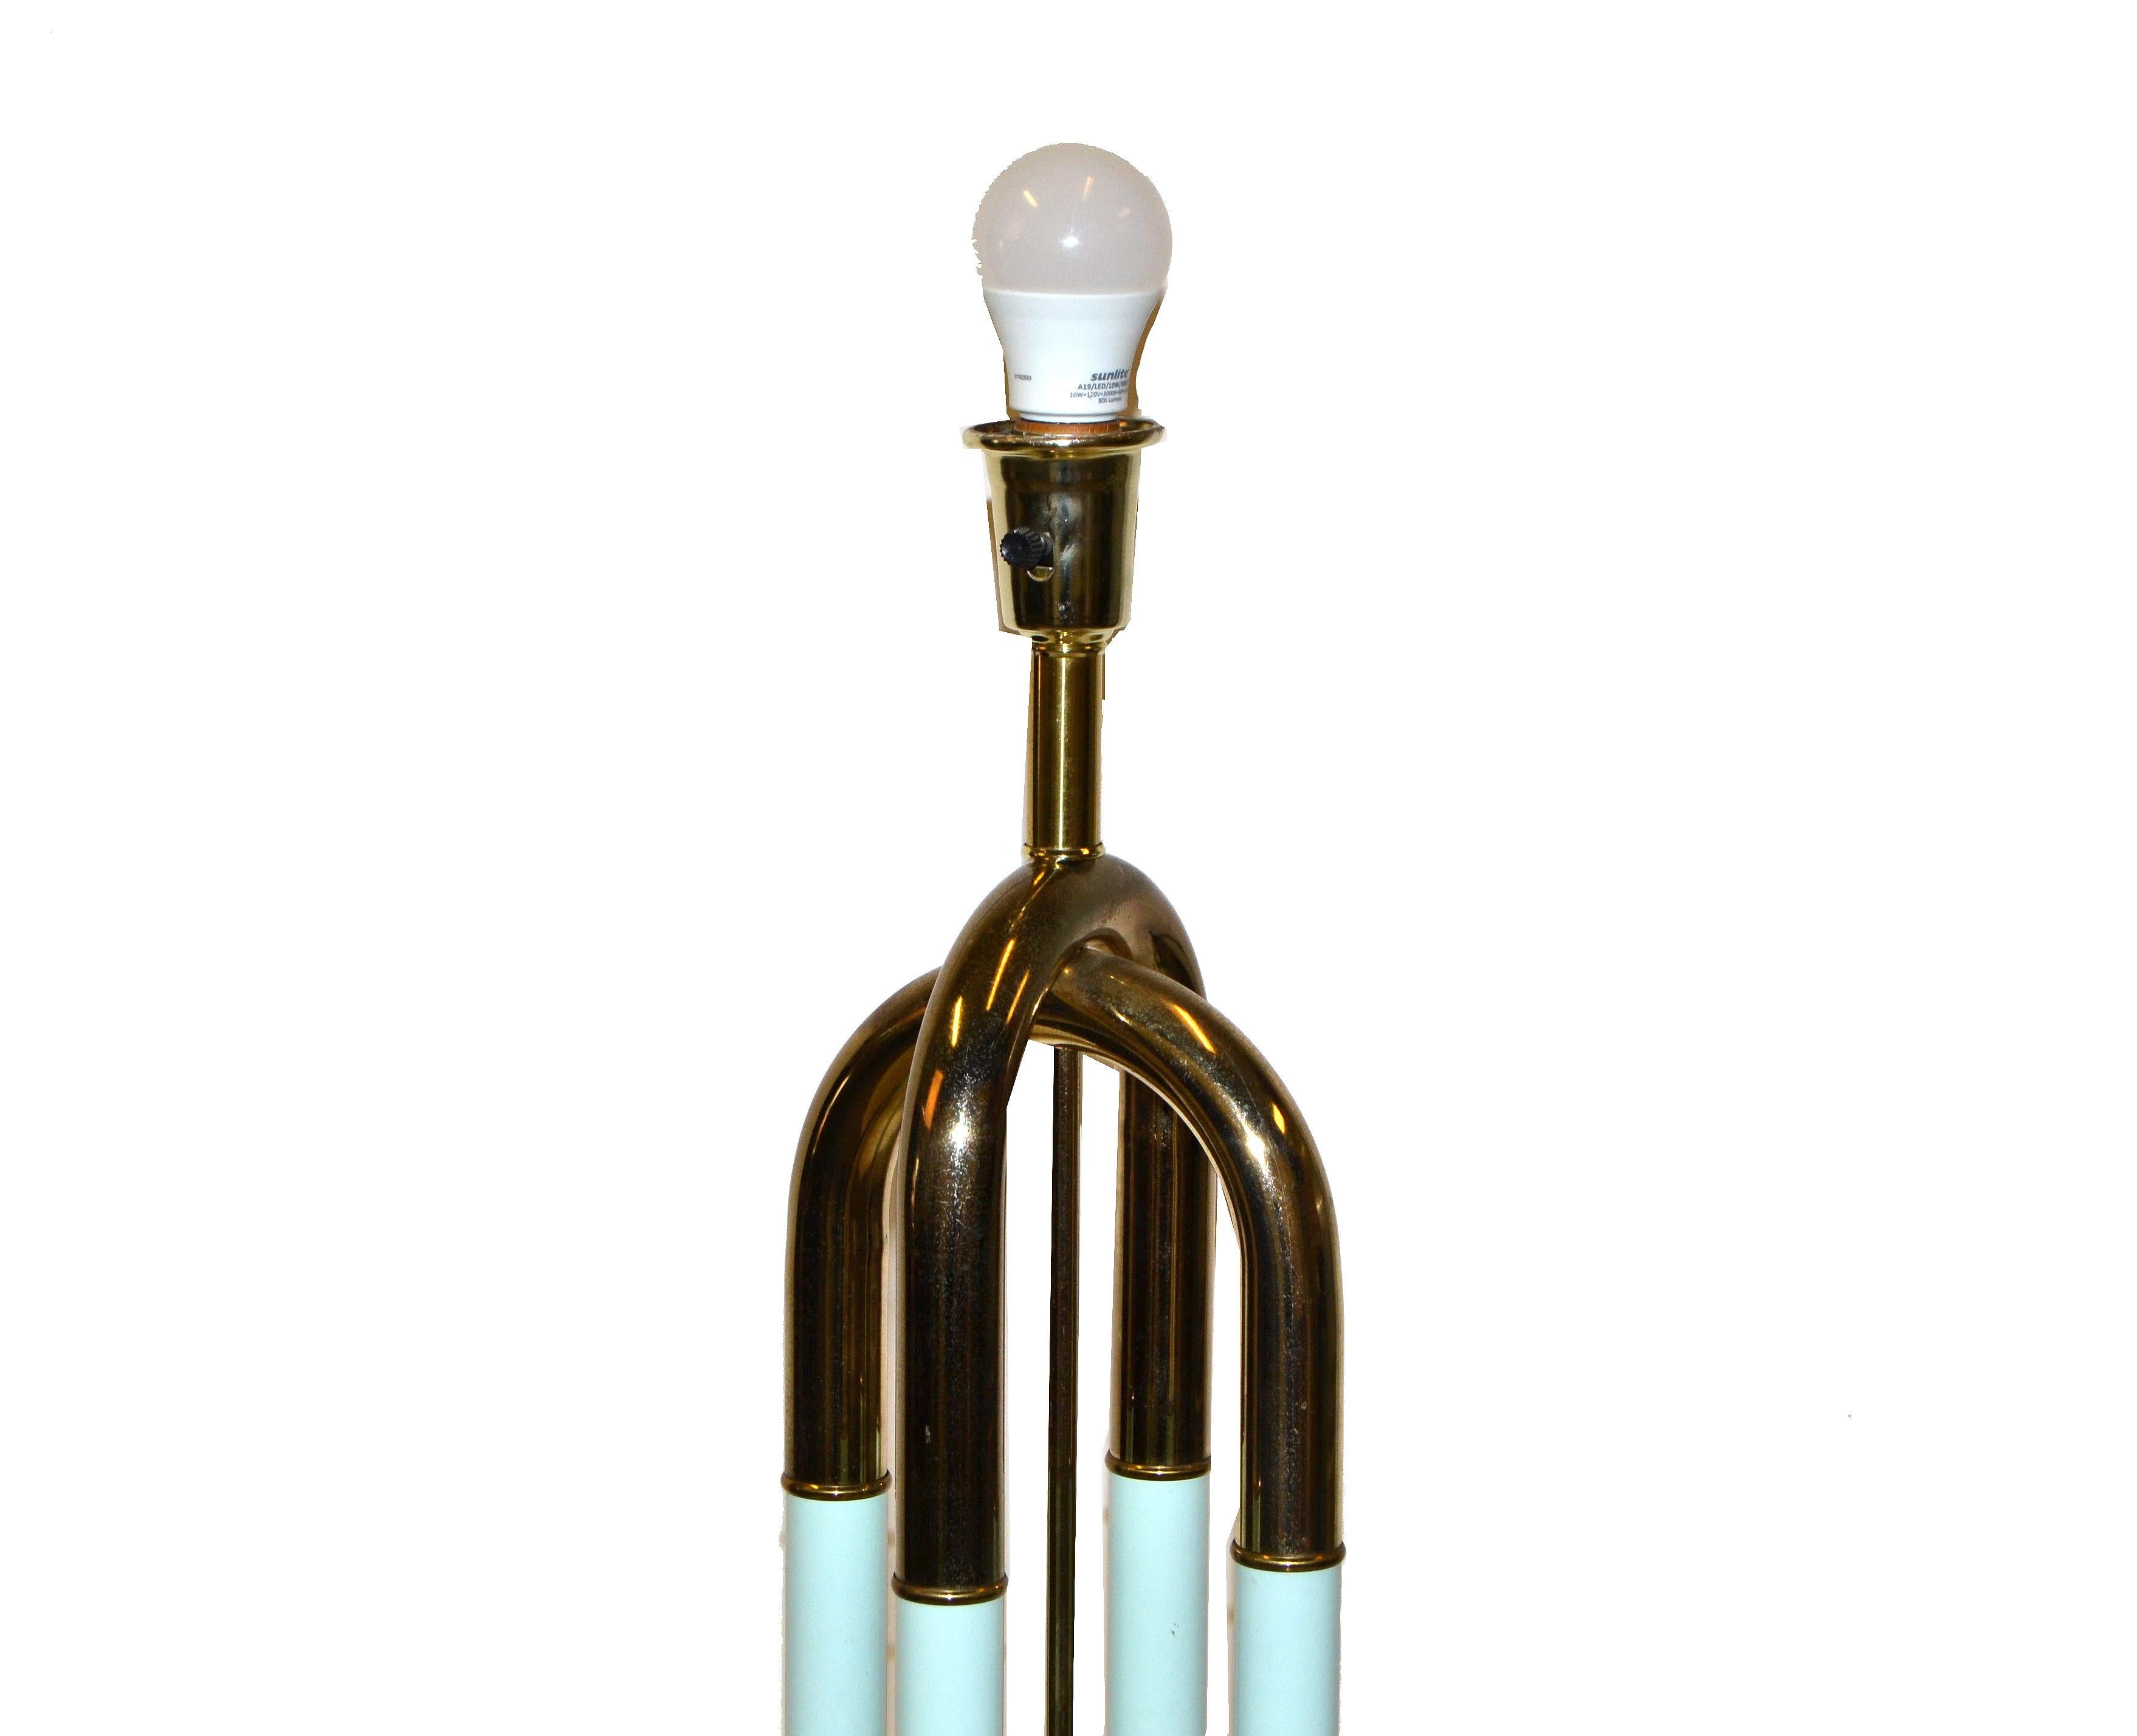 Mid-Century Modern Brass-Plated and Turquoise Enamel Finish Floor Lamp In Good Condition For Sale In Miami, FL